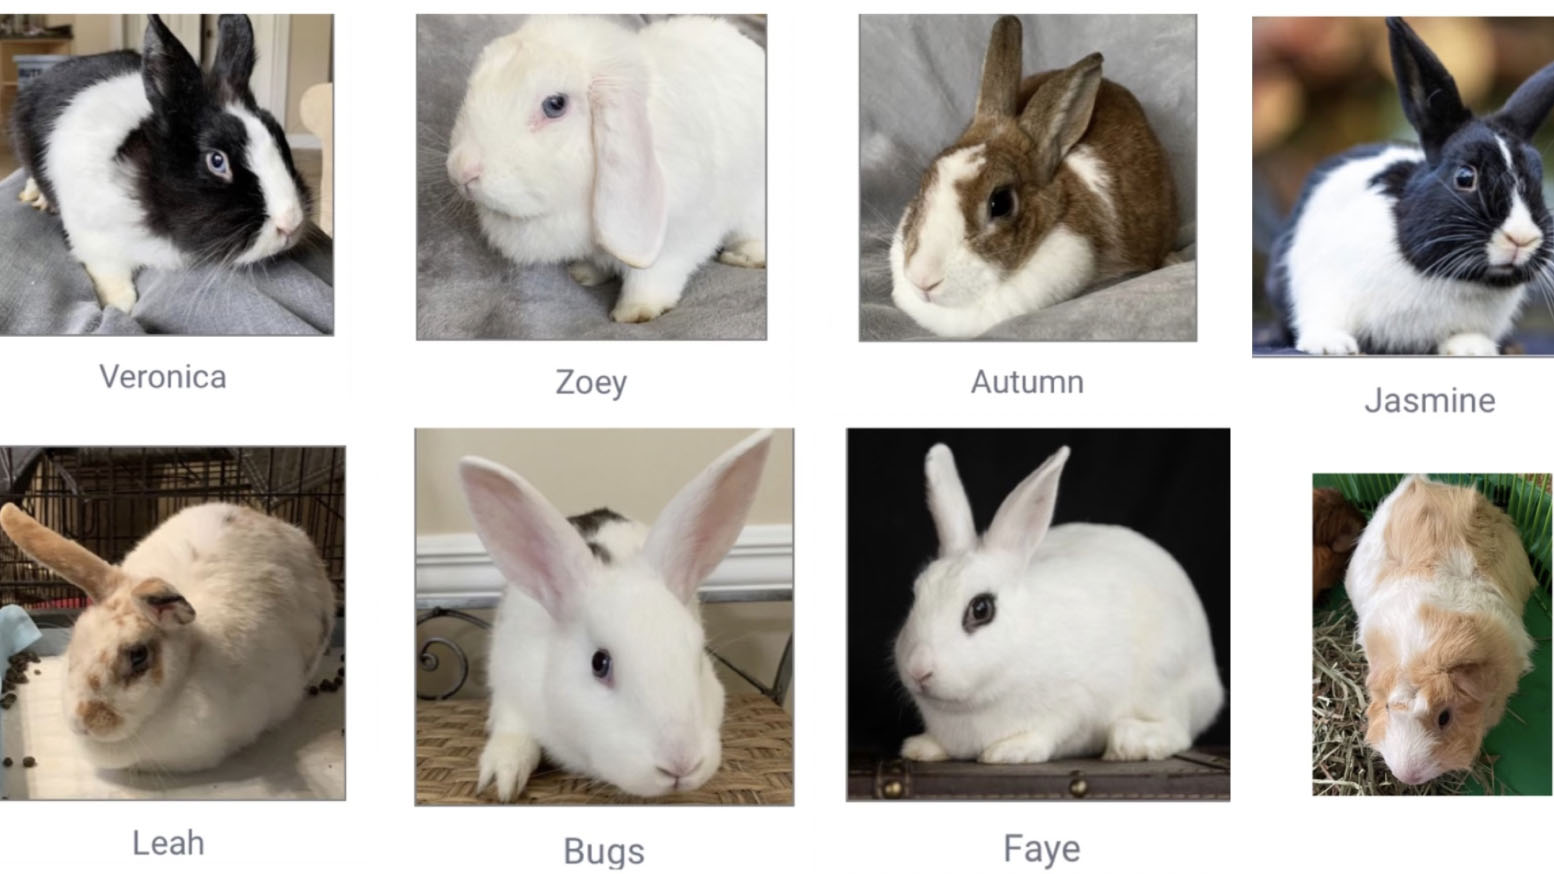 Bunnies and Guinea Pigs Up For Adoption in Coral Springs